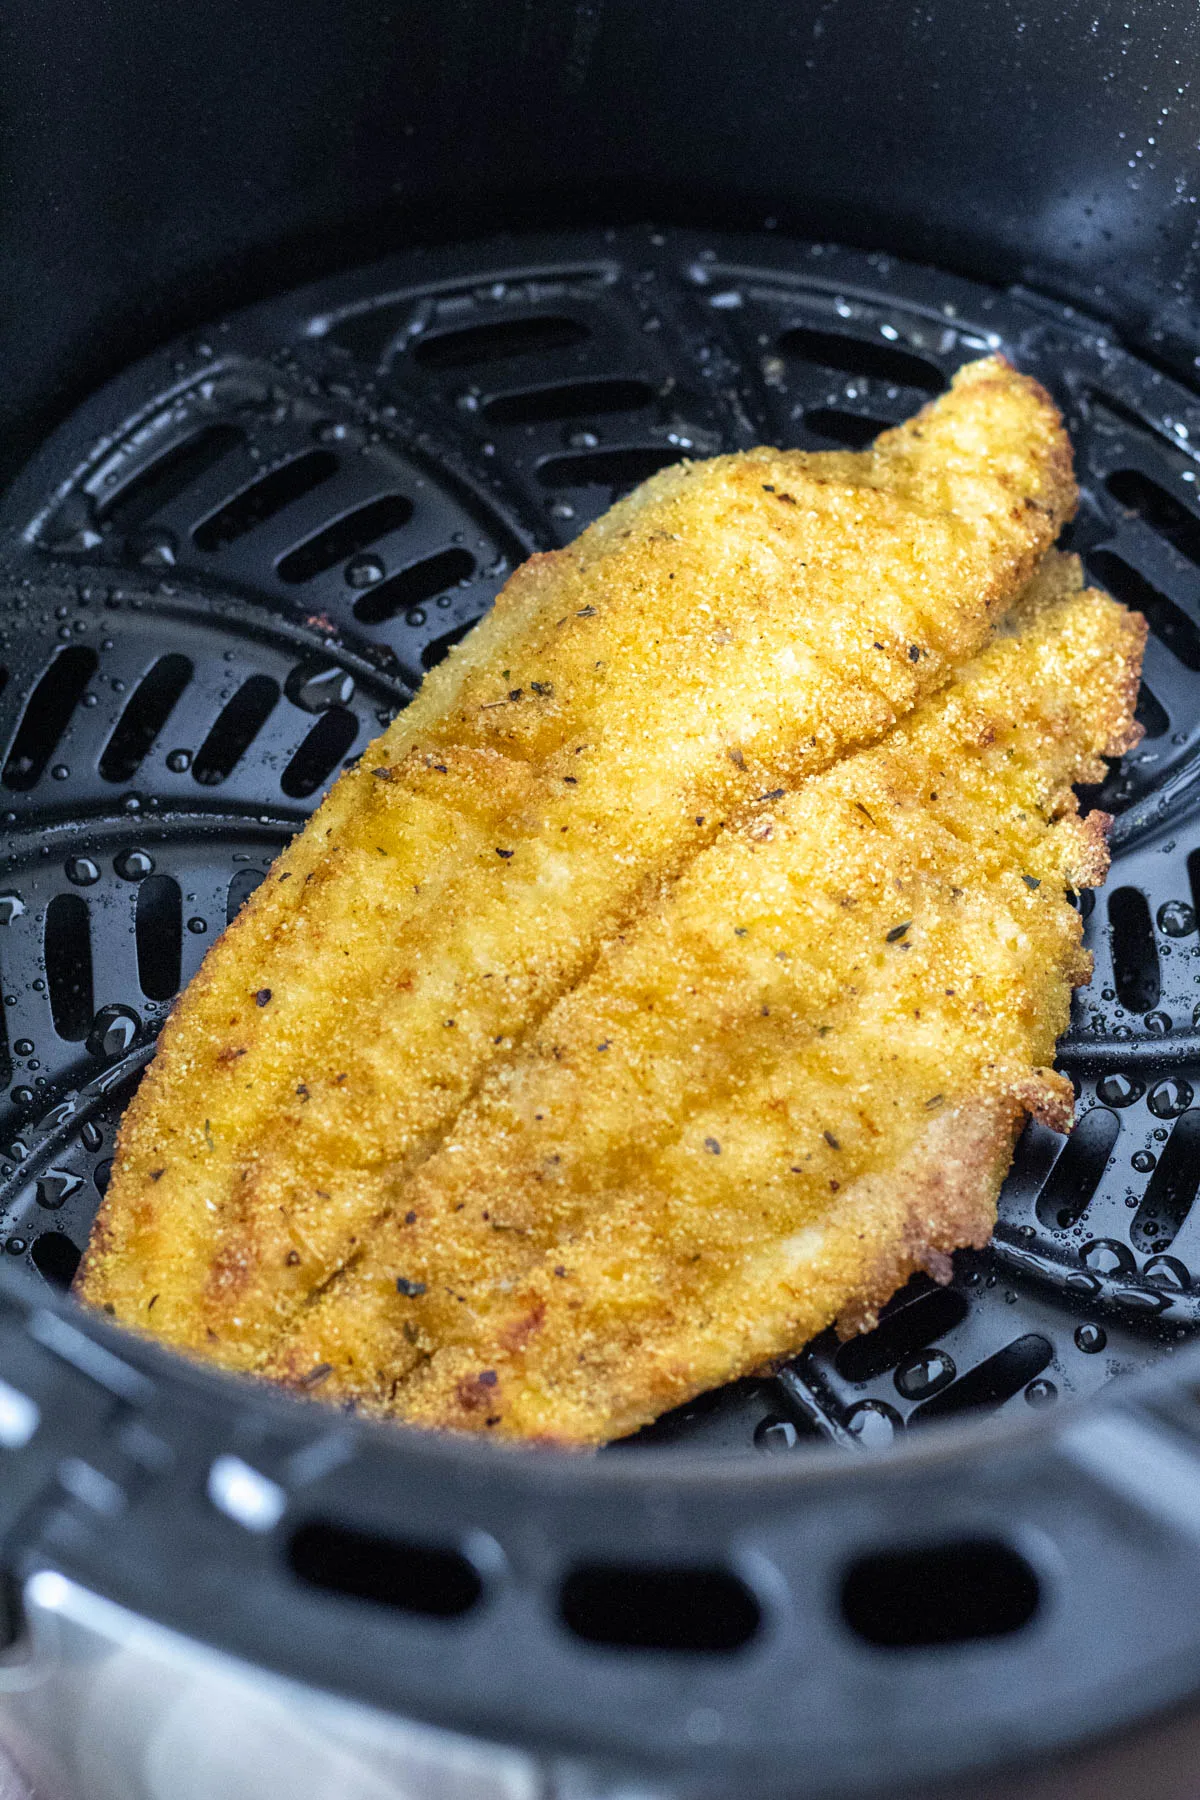 Catfish fillet in air fryer basket, browned on one side and ready to flip.